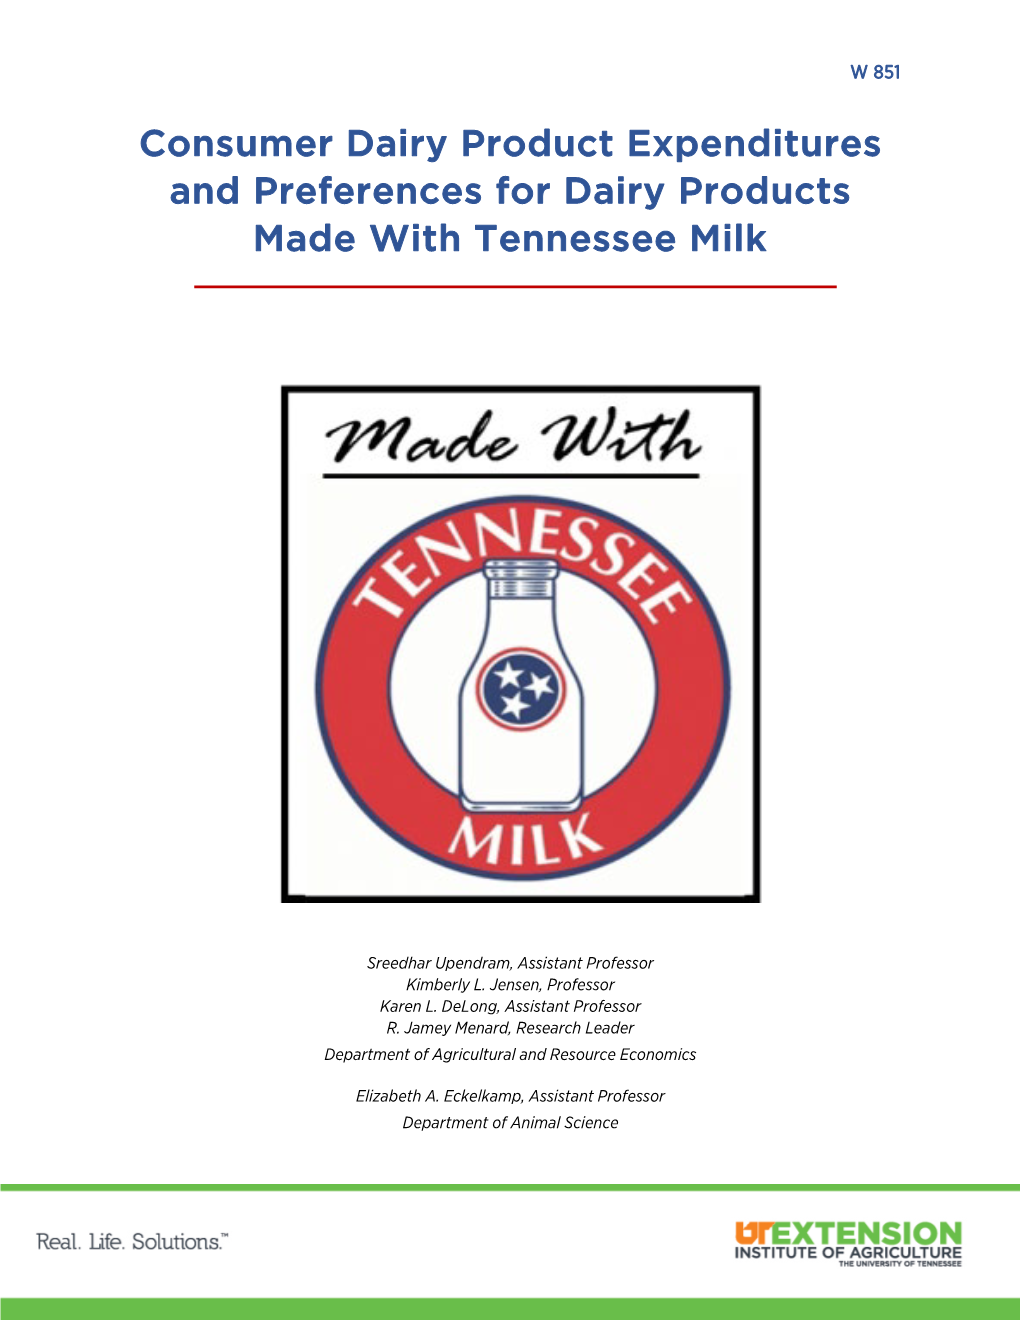 Consumer Dairy Product Expenditures and Preferences for Dairy Products Made with Tennessee Milk